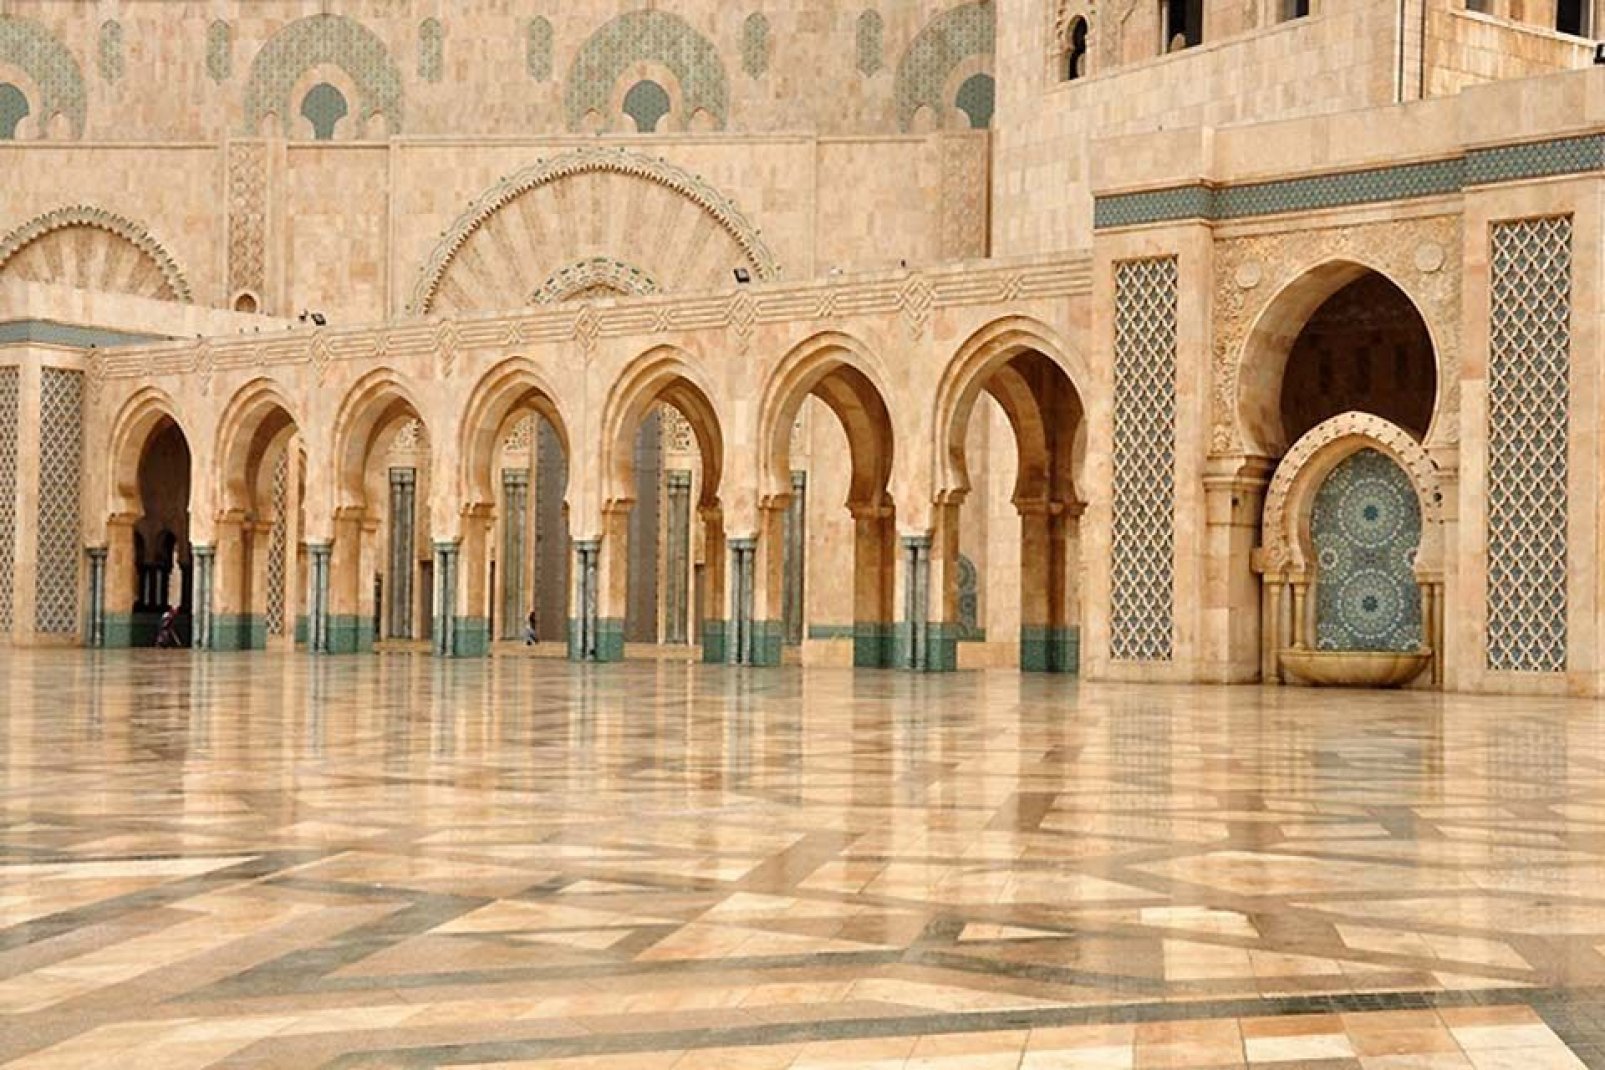 Inside the Hassan II mosque.